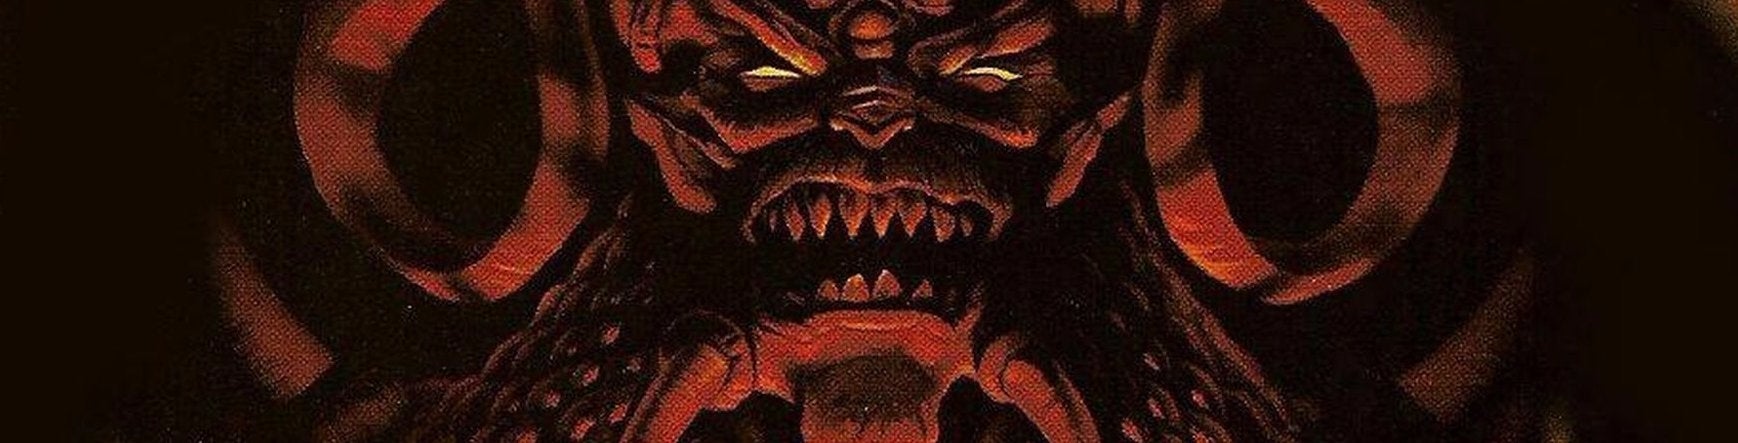 Image for The moment Diablo - and the action-RPG genre - were born